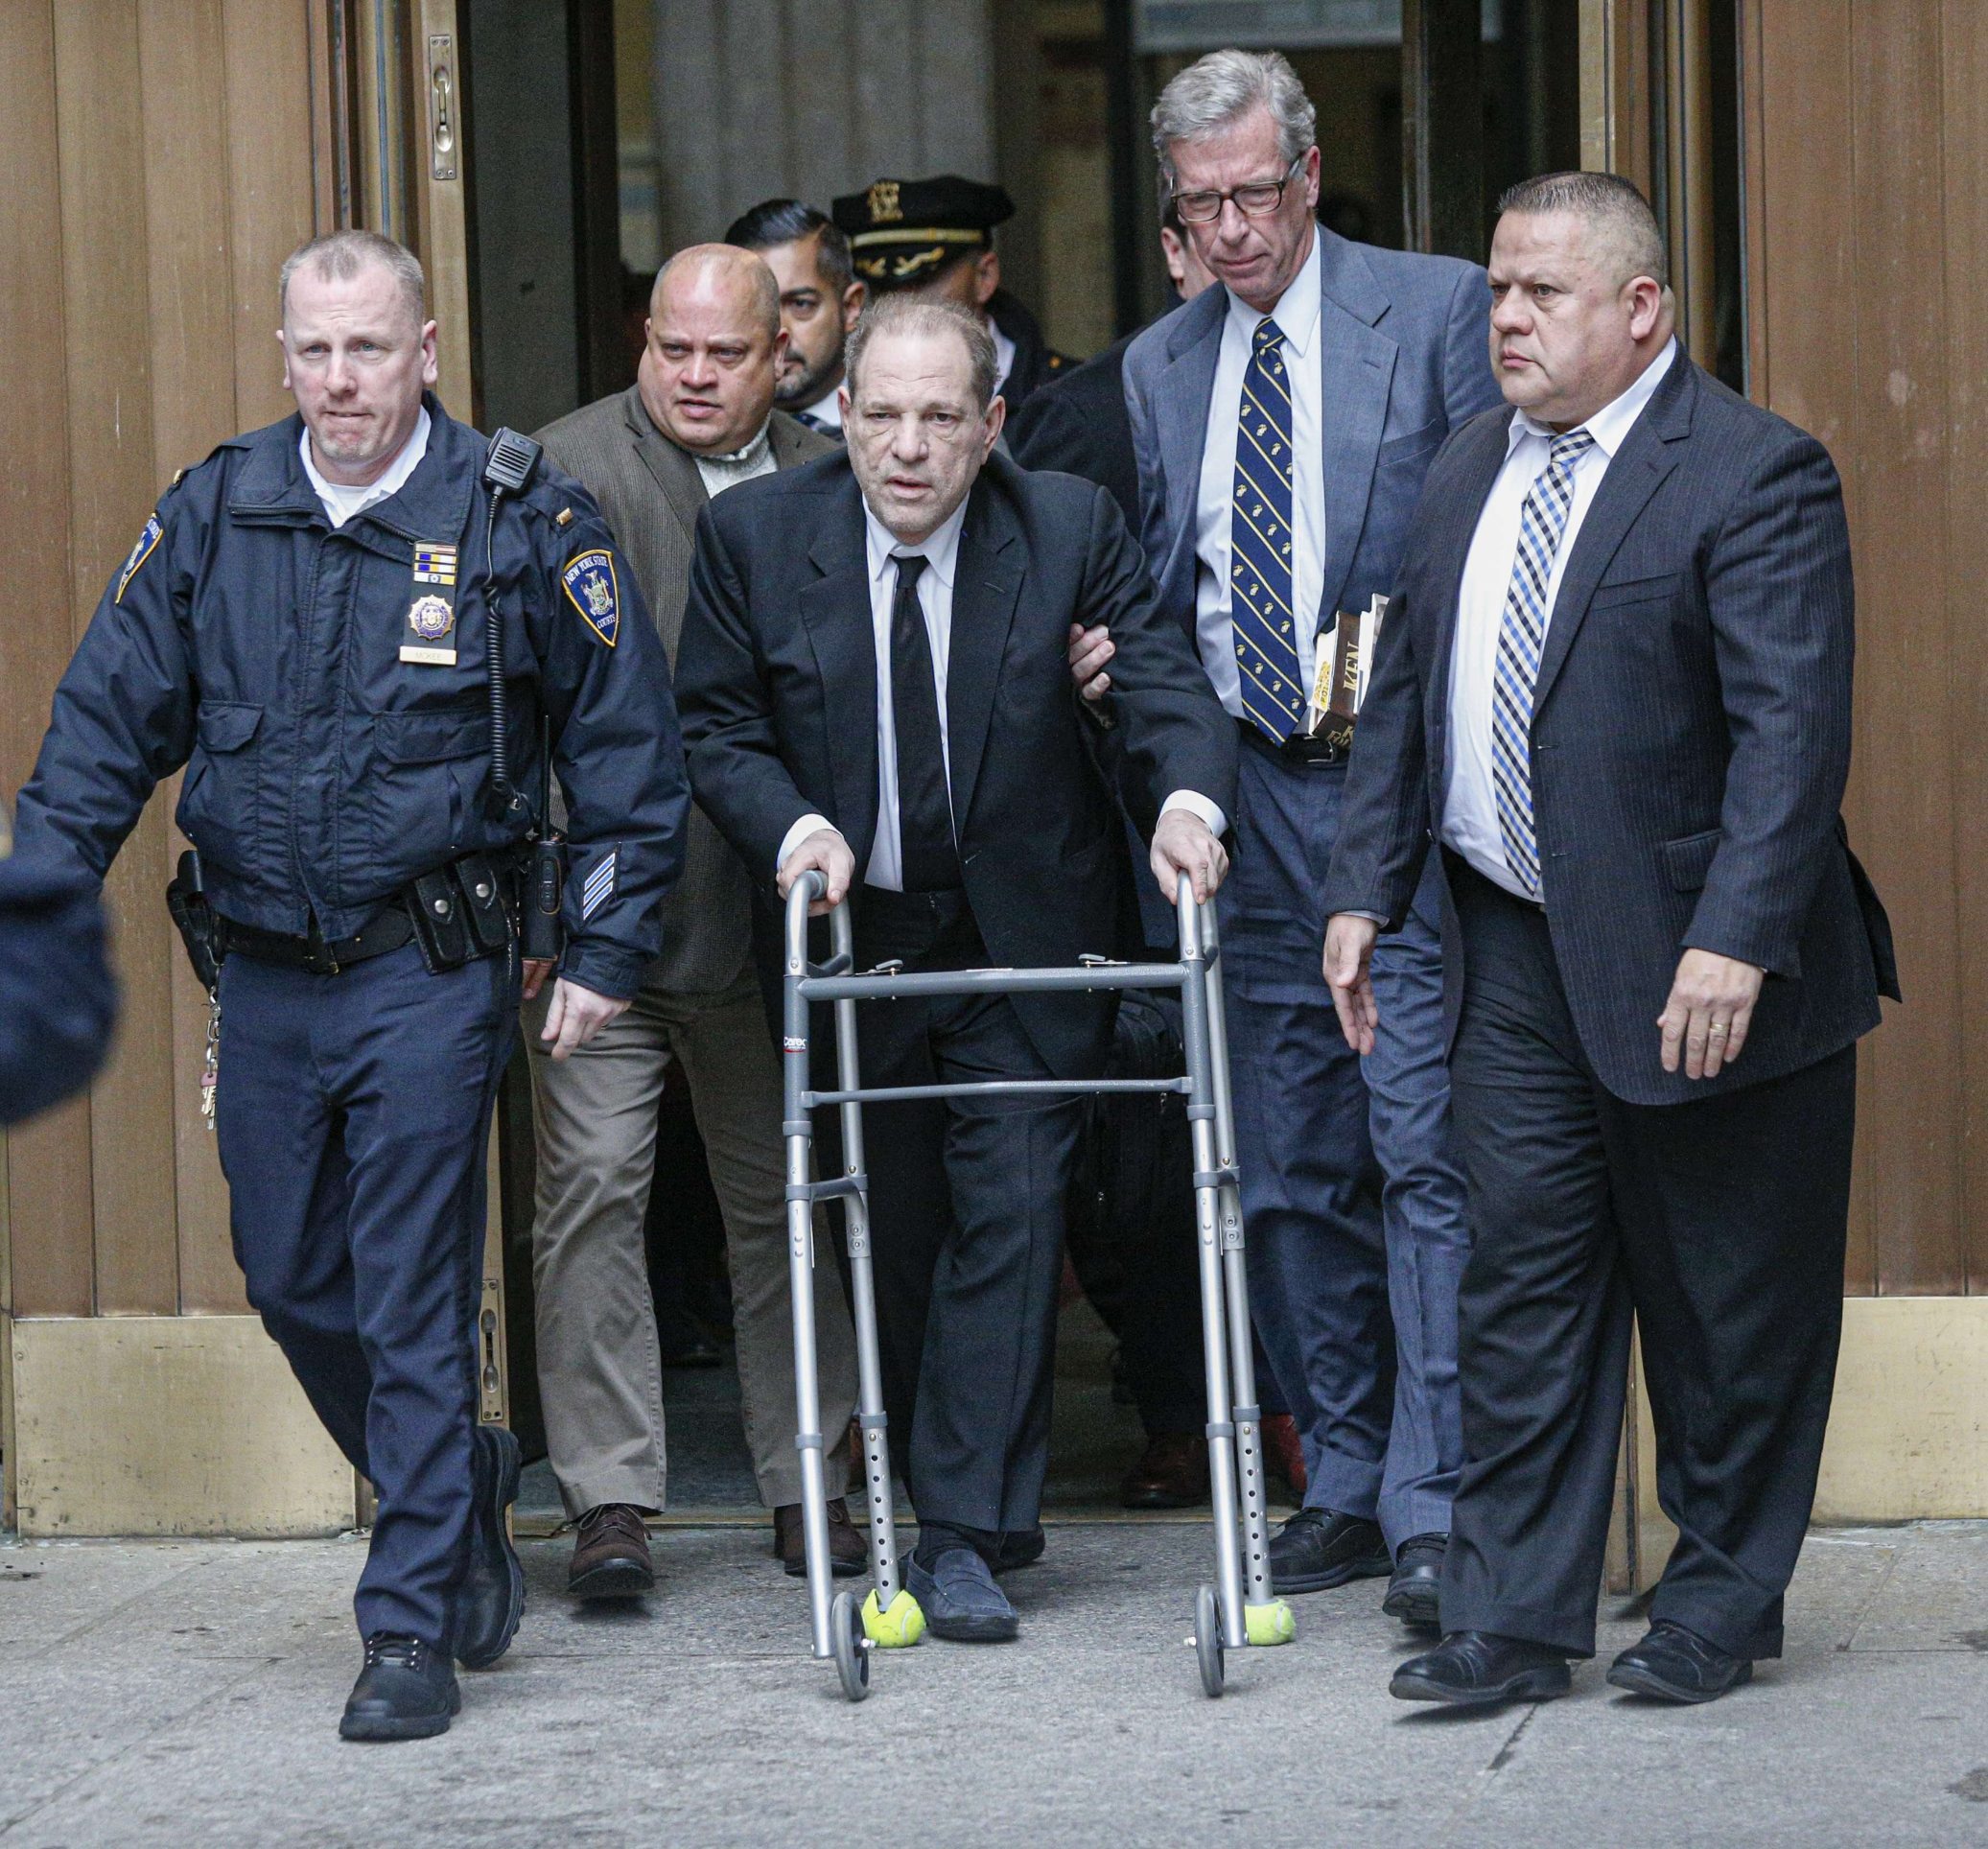 NEW YORK, NY - JANUARY 06: Harvey Weinstein leaves court on January 6, 2020 in New York City. Weinstein, a movie producer whose alleged sexual misconduct helped spark the #MeToo movement, pleaded not-guilty on five counts of rape and sexual assault against two unnamed women and faces a possible life sentence in prison.   Kena Betancur/Getty Images/AFP
== FOR NEWSPAPERS, INTERNET, TELCOS & TELEVISION USE ONLY ==